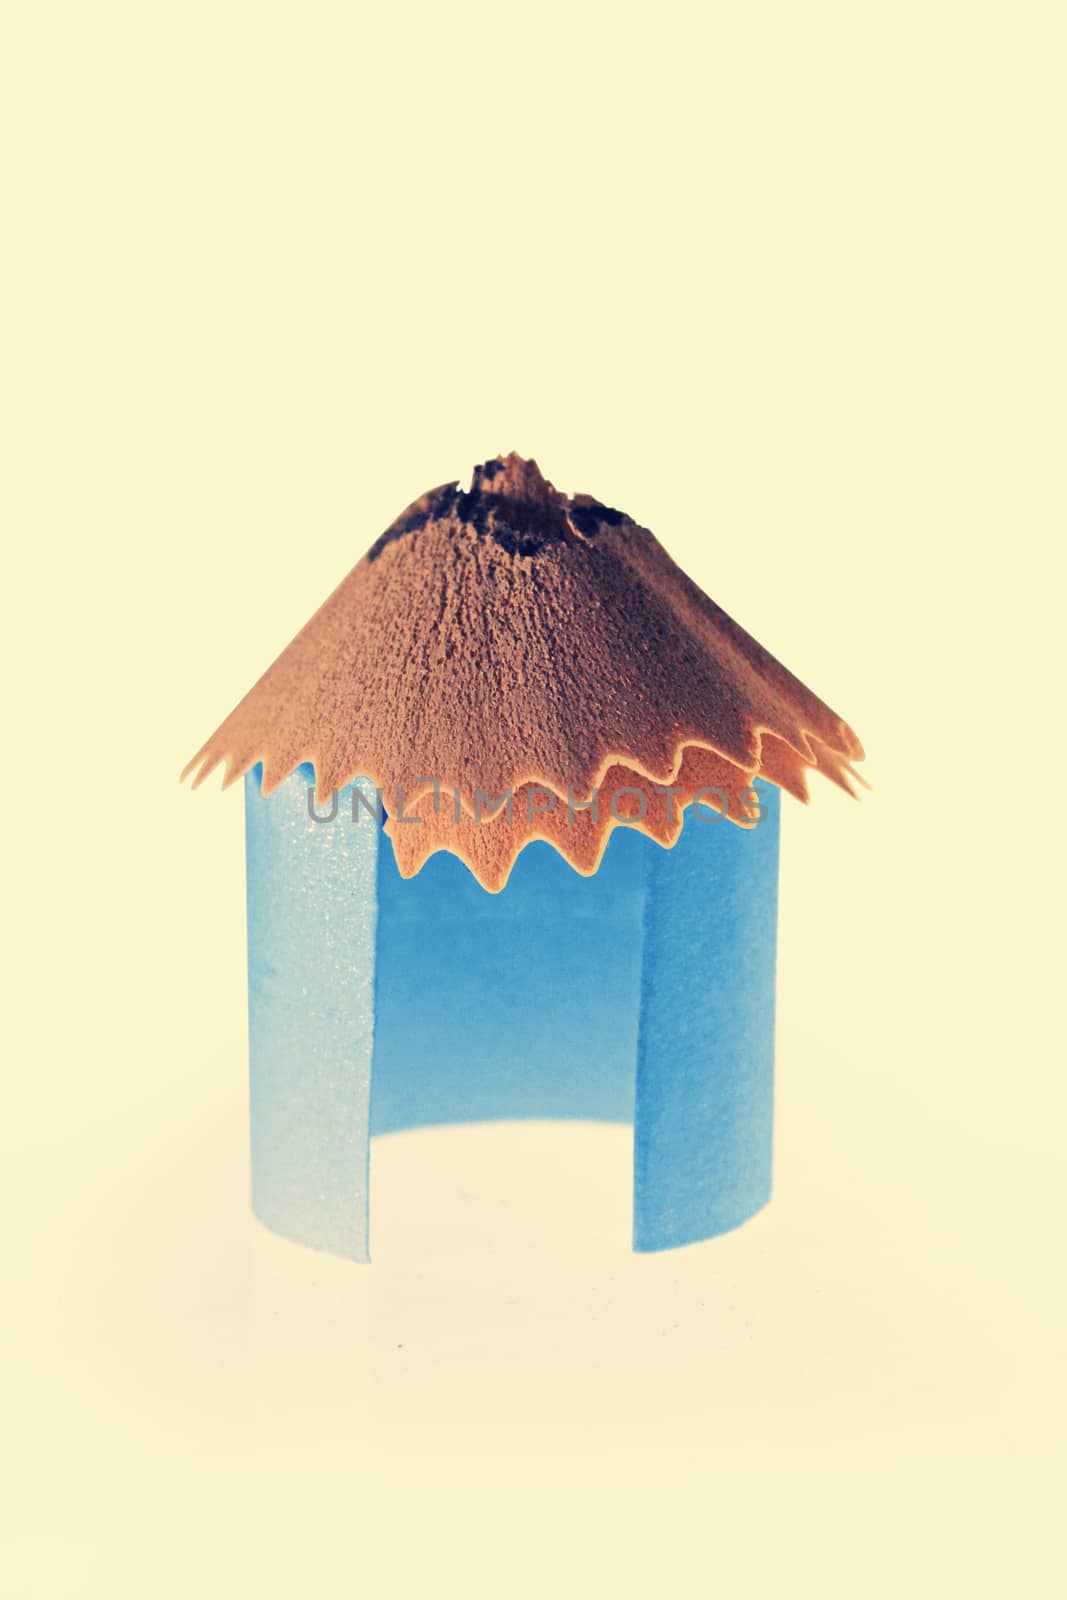 Paper Hut With Pencil Shavings Roof